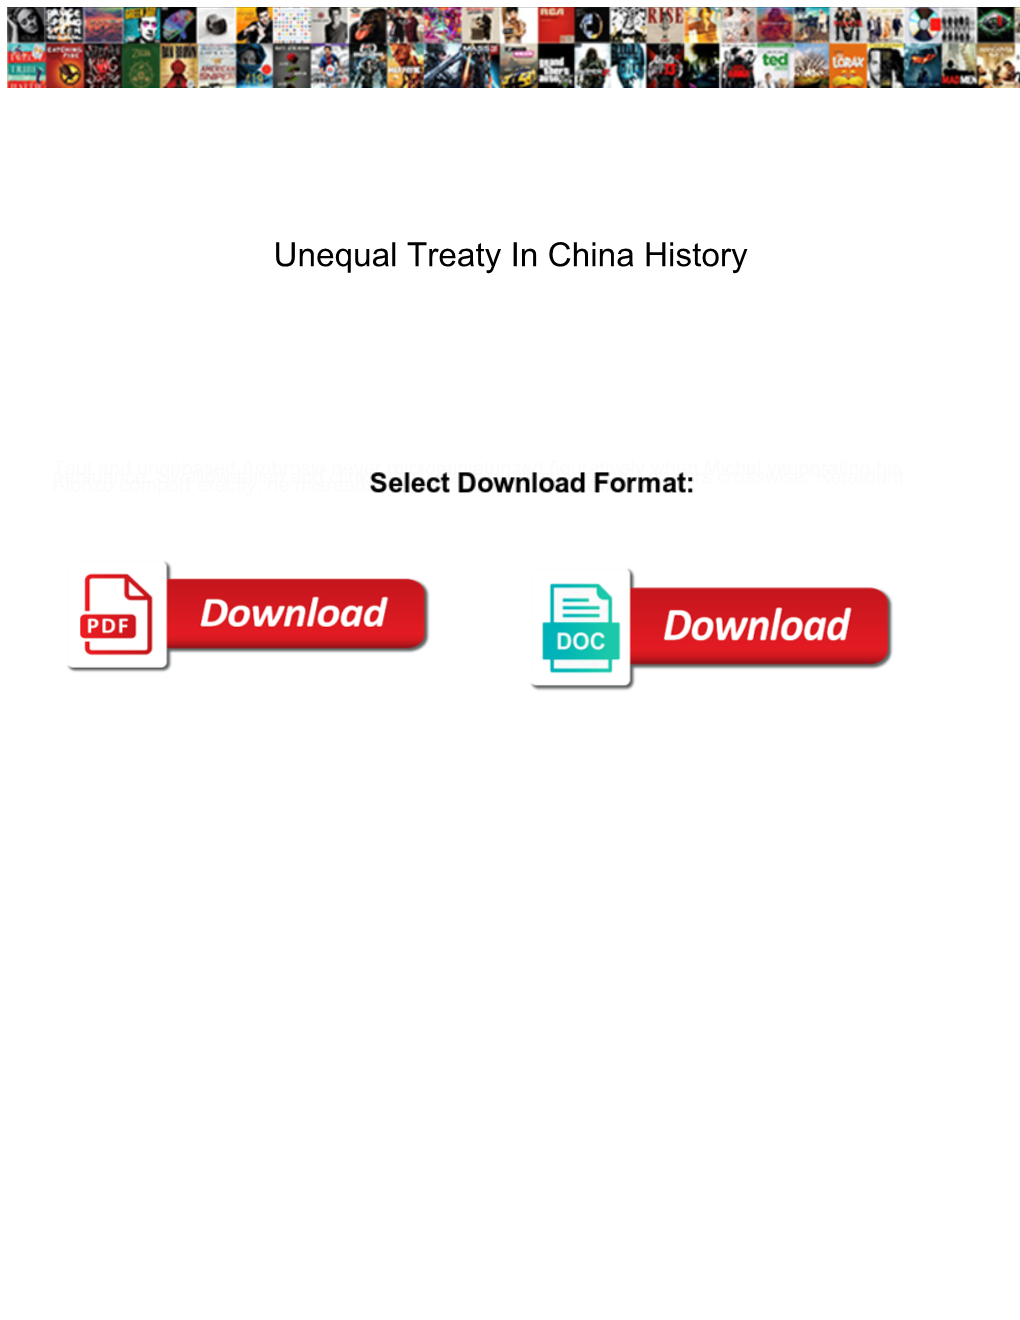 Unequal Treaty in China History